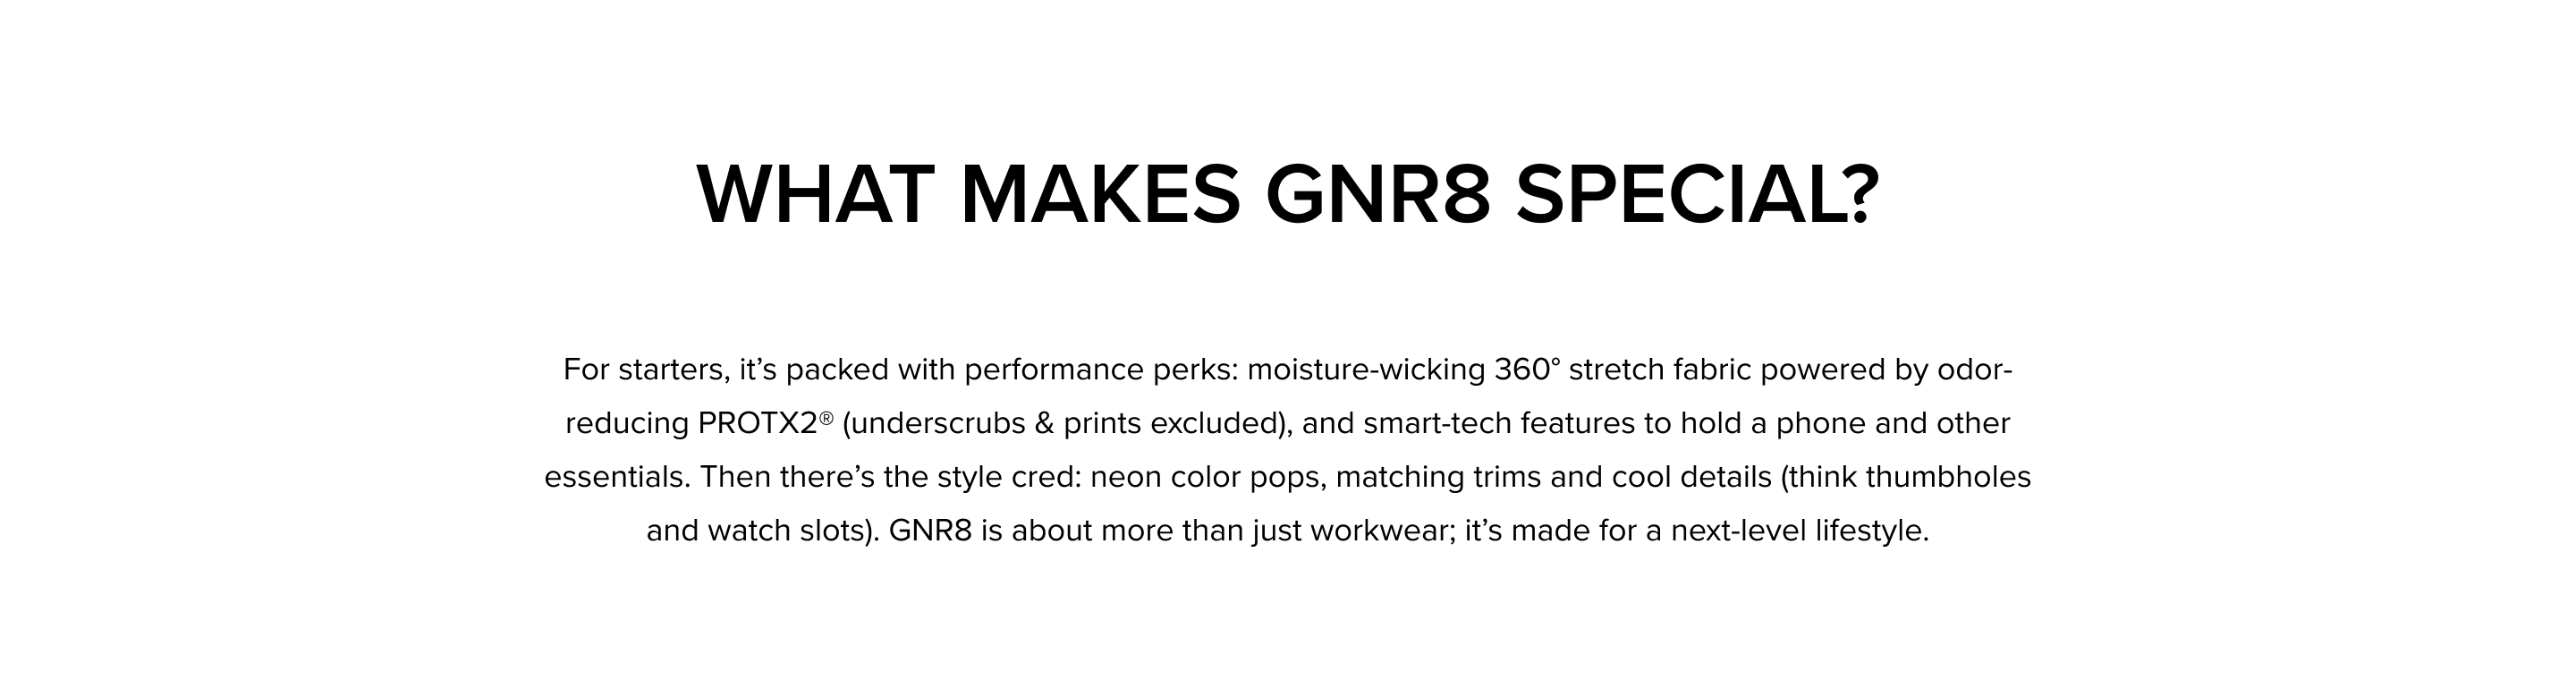 What makes GNR8 speacial - it's packed with performance perks